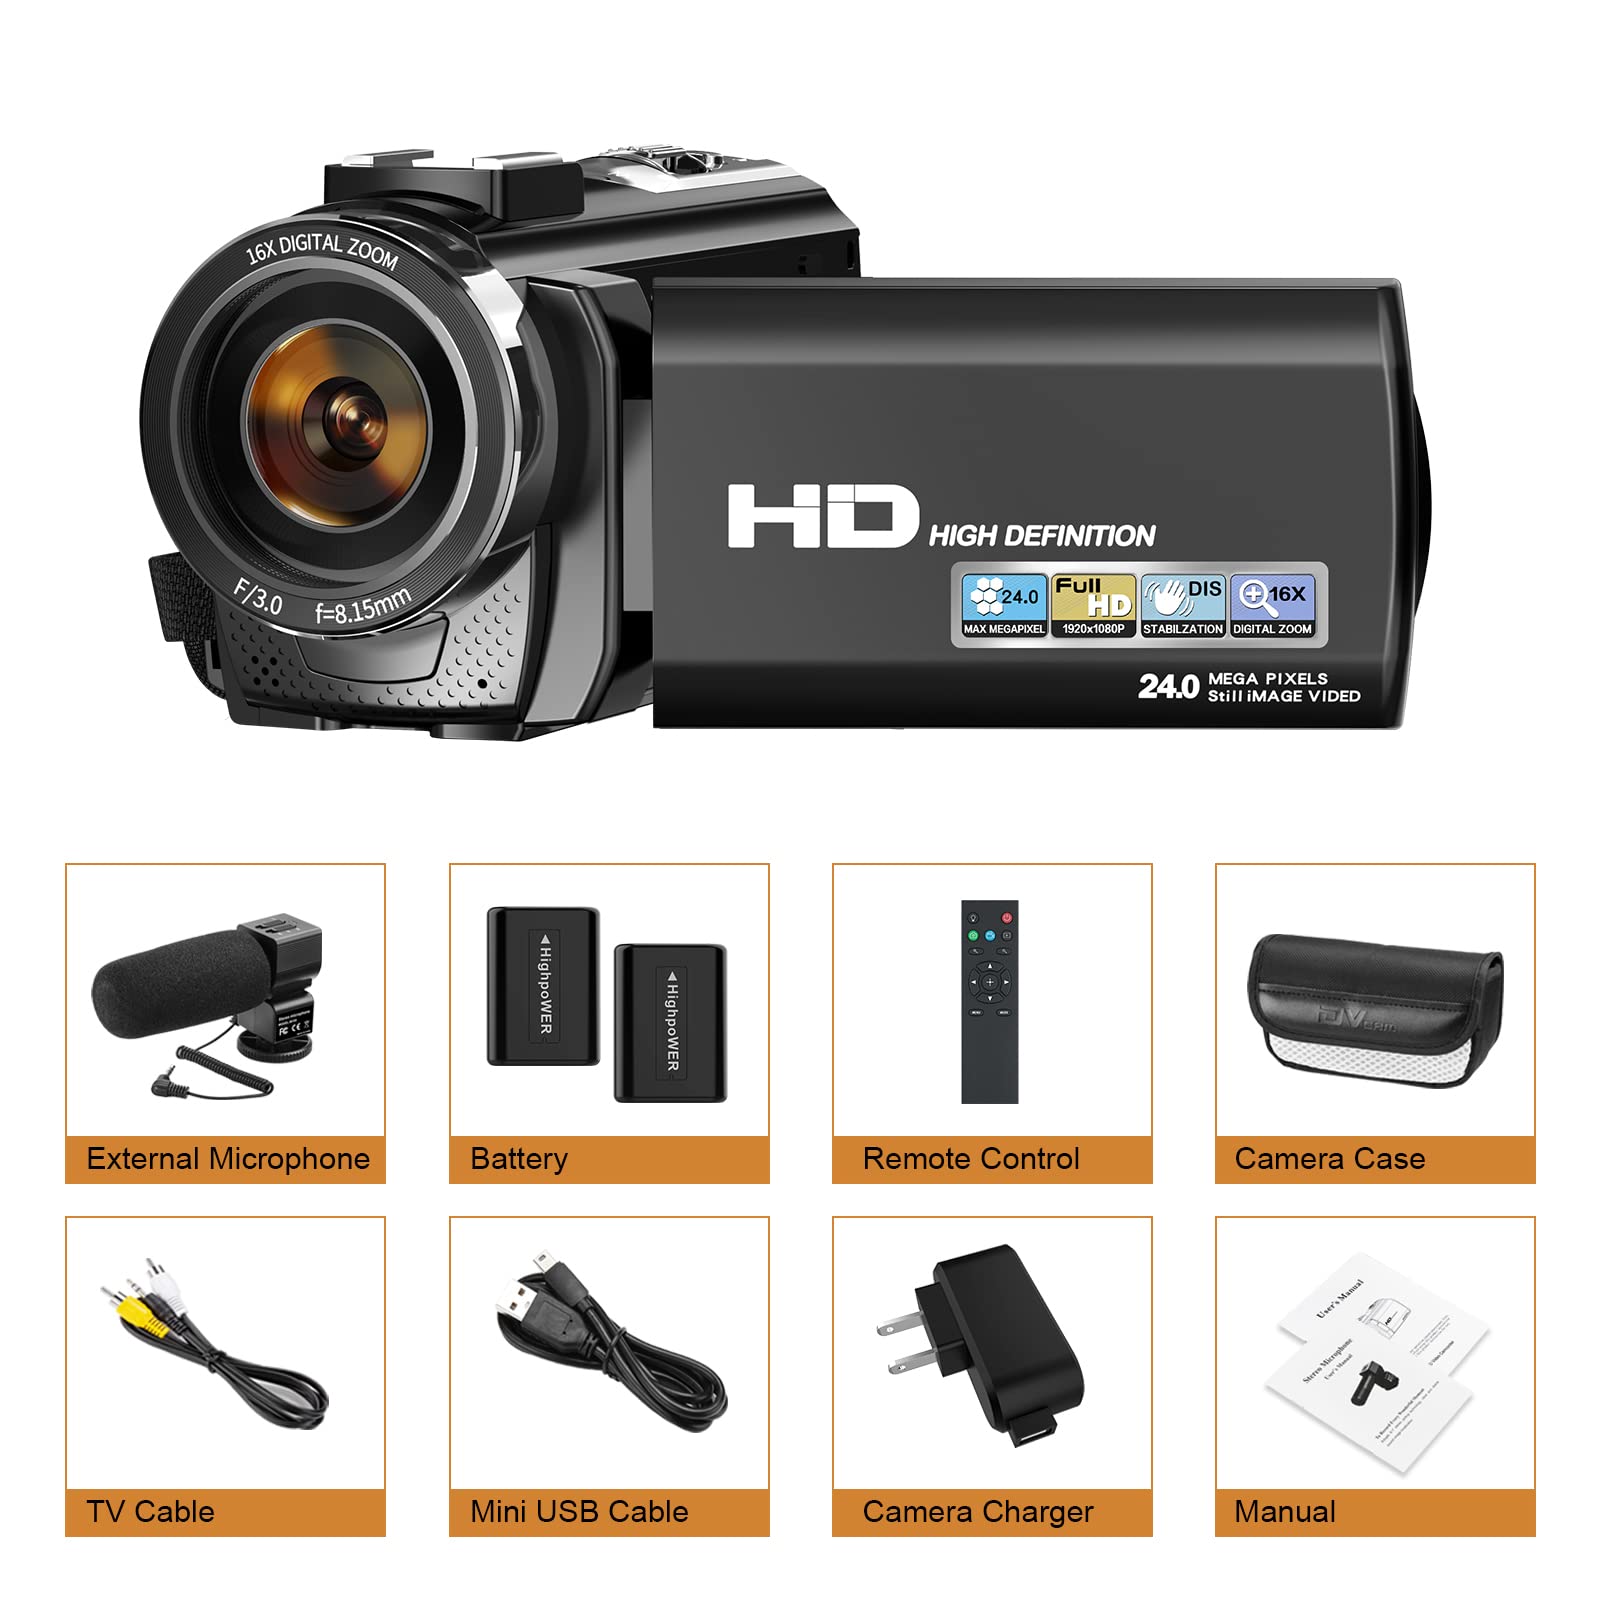 Aasonida Video Camera Camcorder for YouTube, Digital Vlogging Camera FHD 1080P 30FPS 24MP 3.0 Inch 270° Rotation Screen Video Recorder with Microphone, Remote Control, 2 Batteries